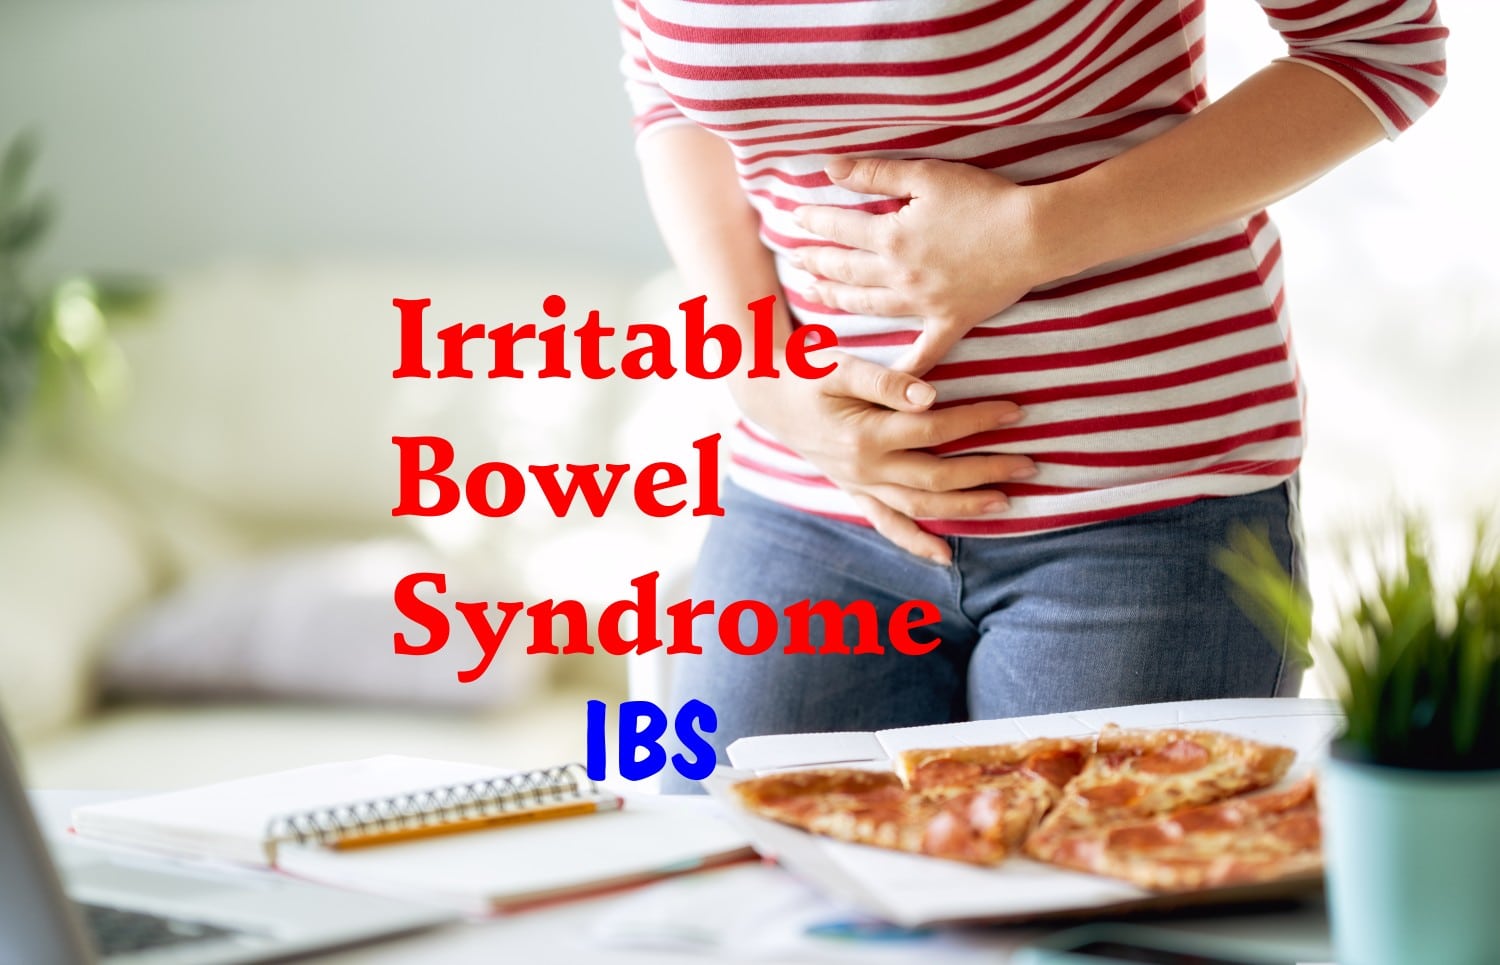 10 Home Remedies For Irritable Bowel Syndrome